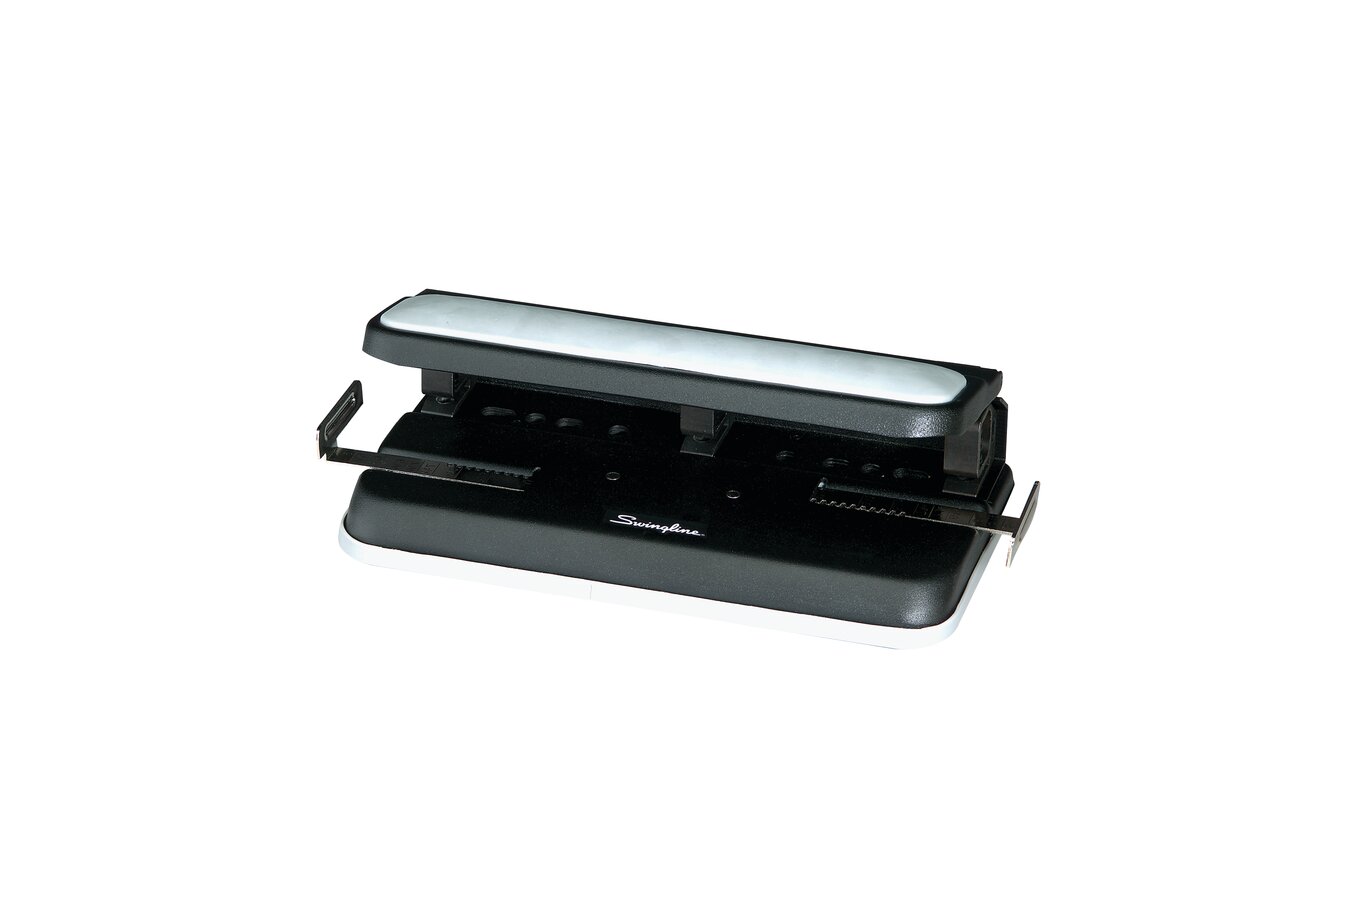 Swingline LightTouch Heavy Duty 2-7 Hole Punch - 74357 (Discontinued)